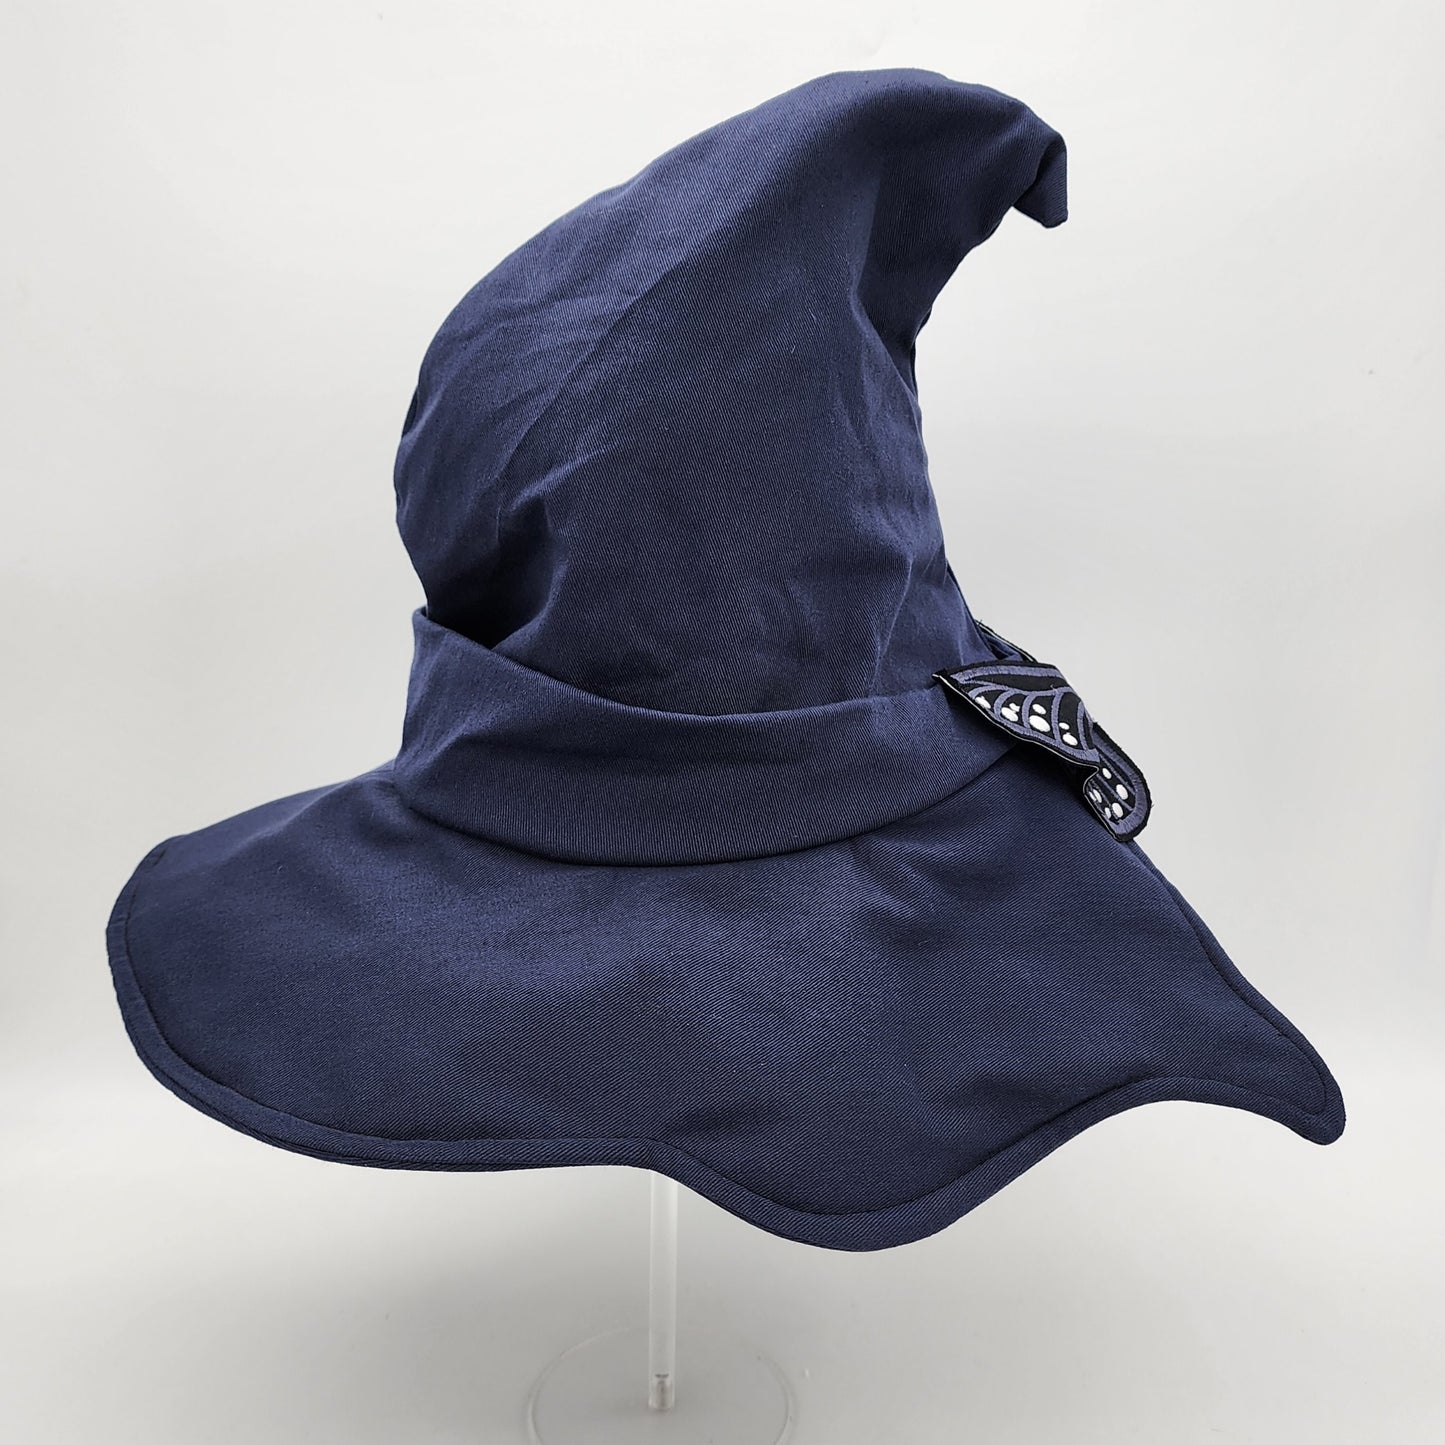 Butterfly Witch Hat- Navy with Navy and White Embroidery